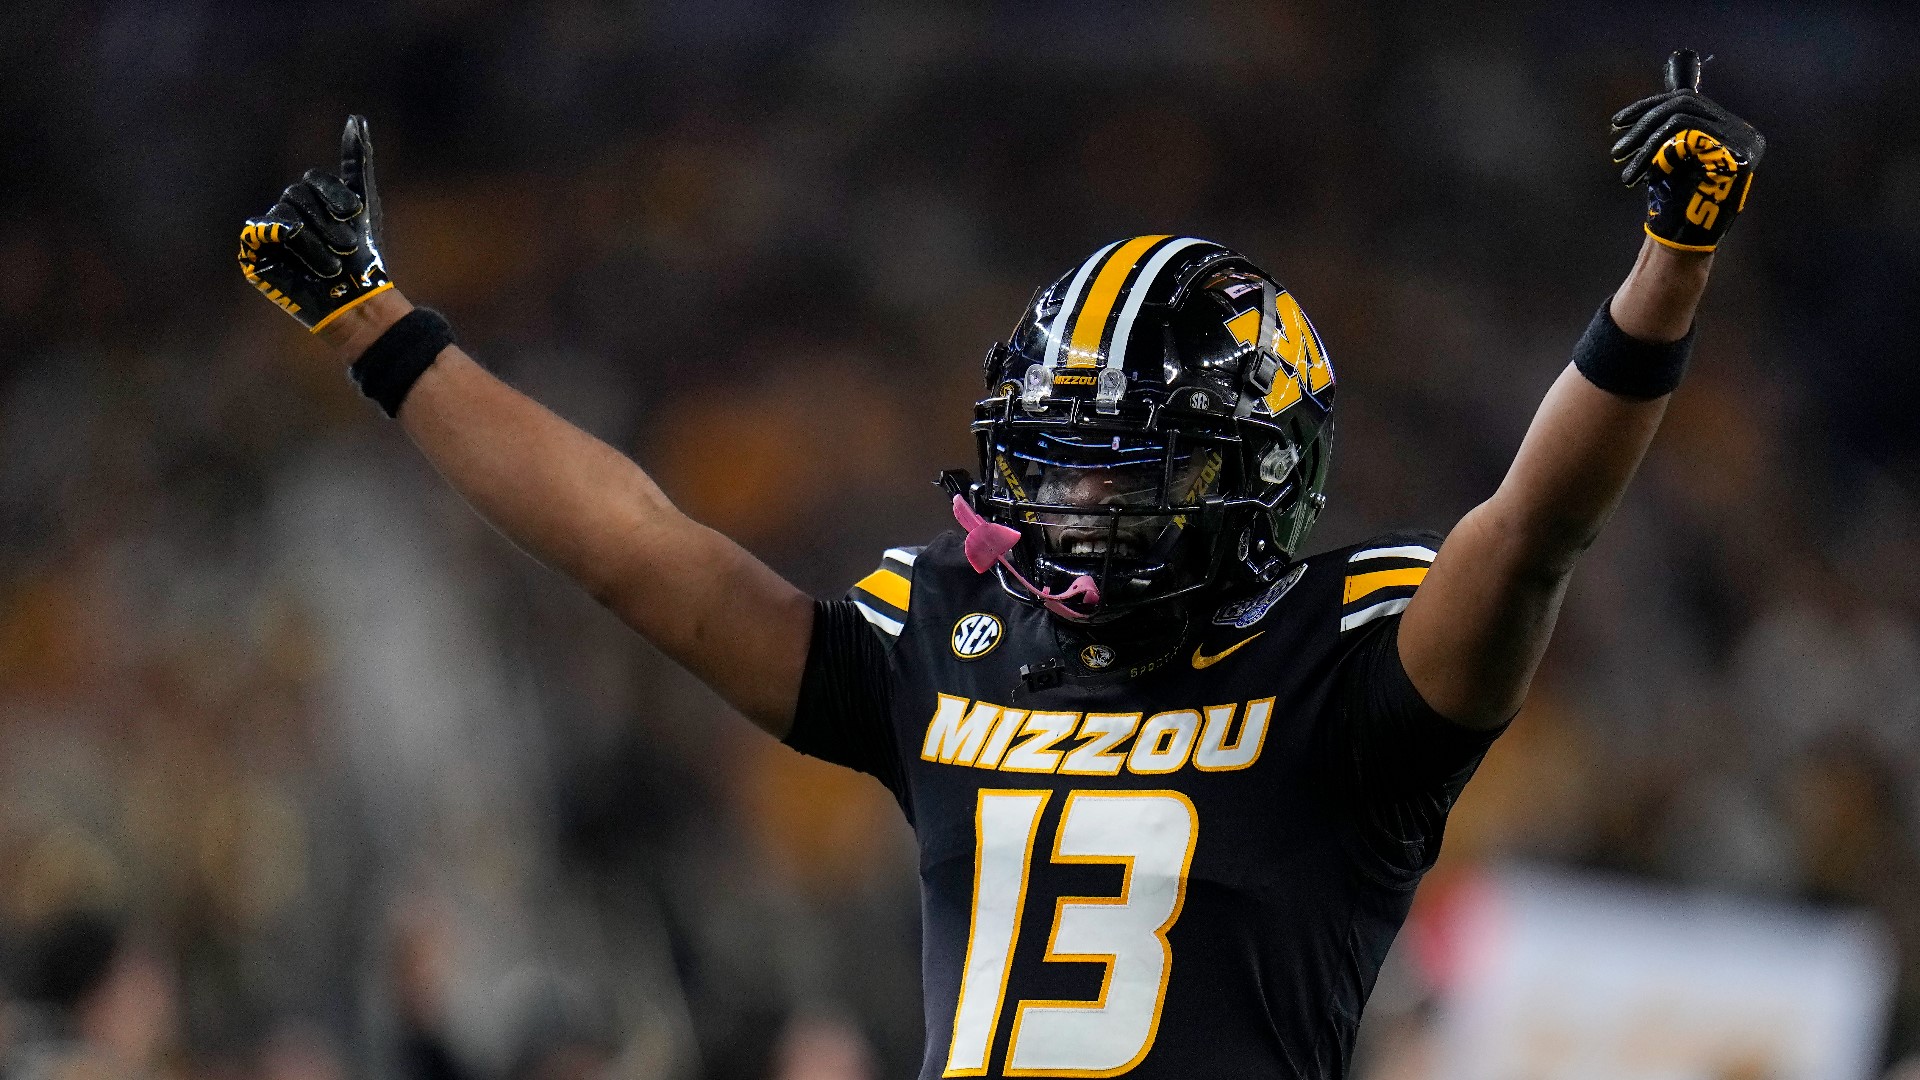 Brady Cook, Cody Schrader and Luther Burden III all dazzled in Mizzou's win over Ohio State.